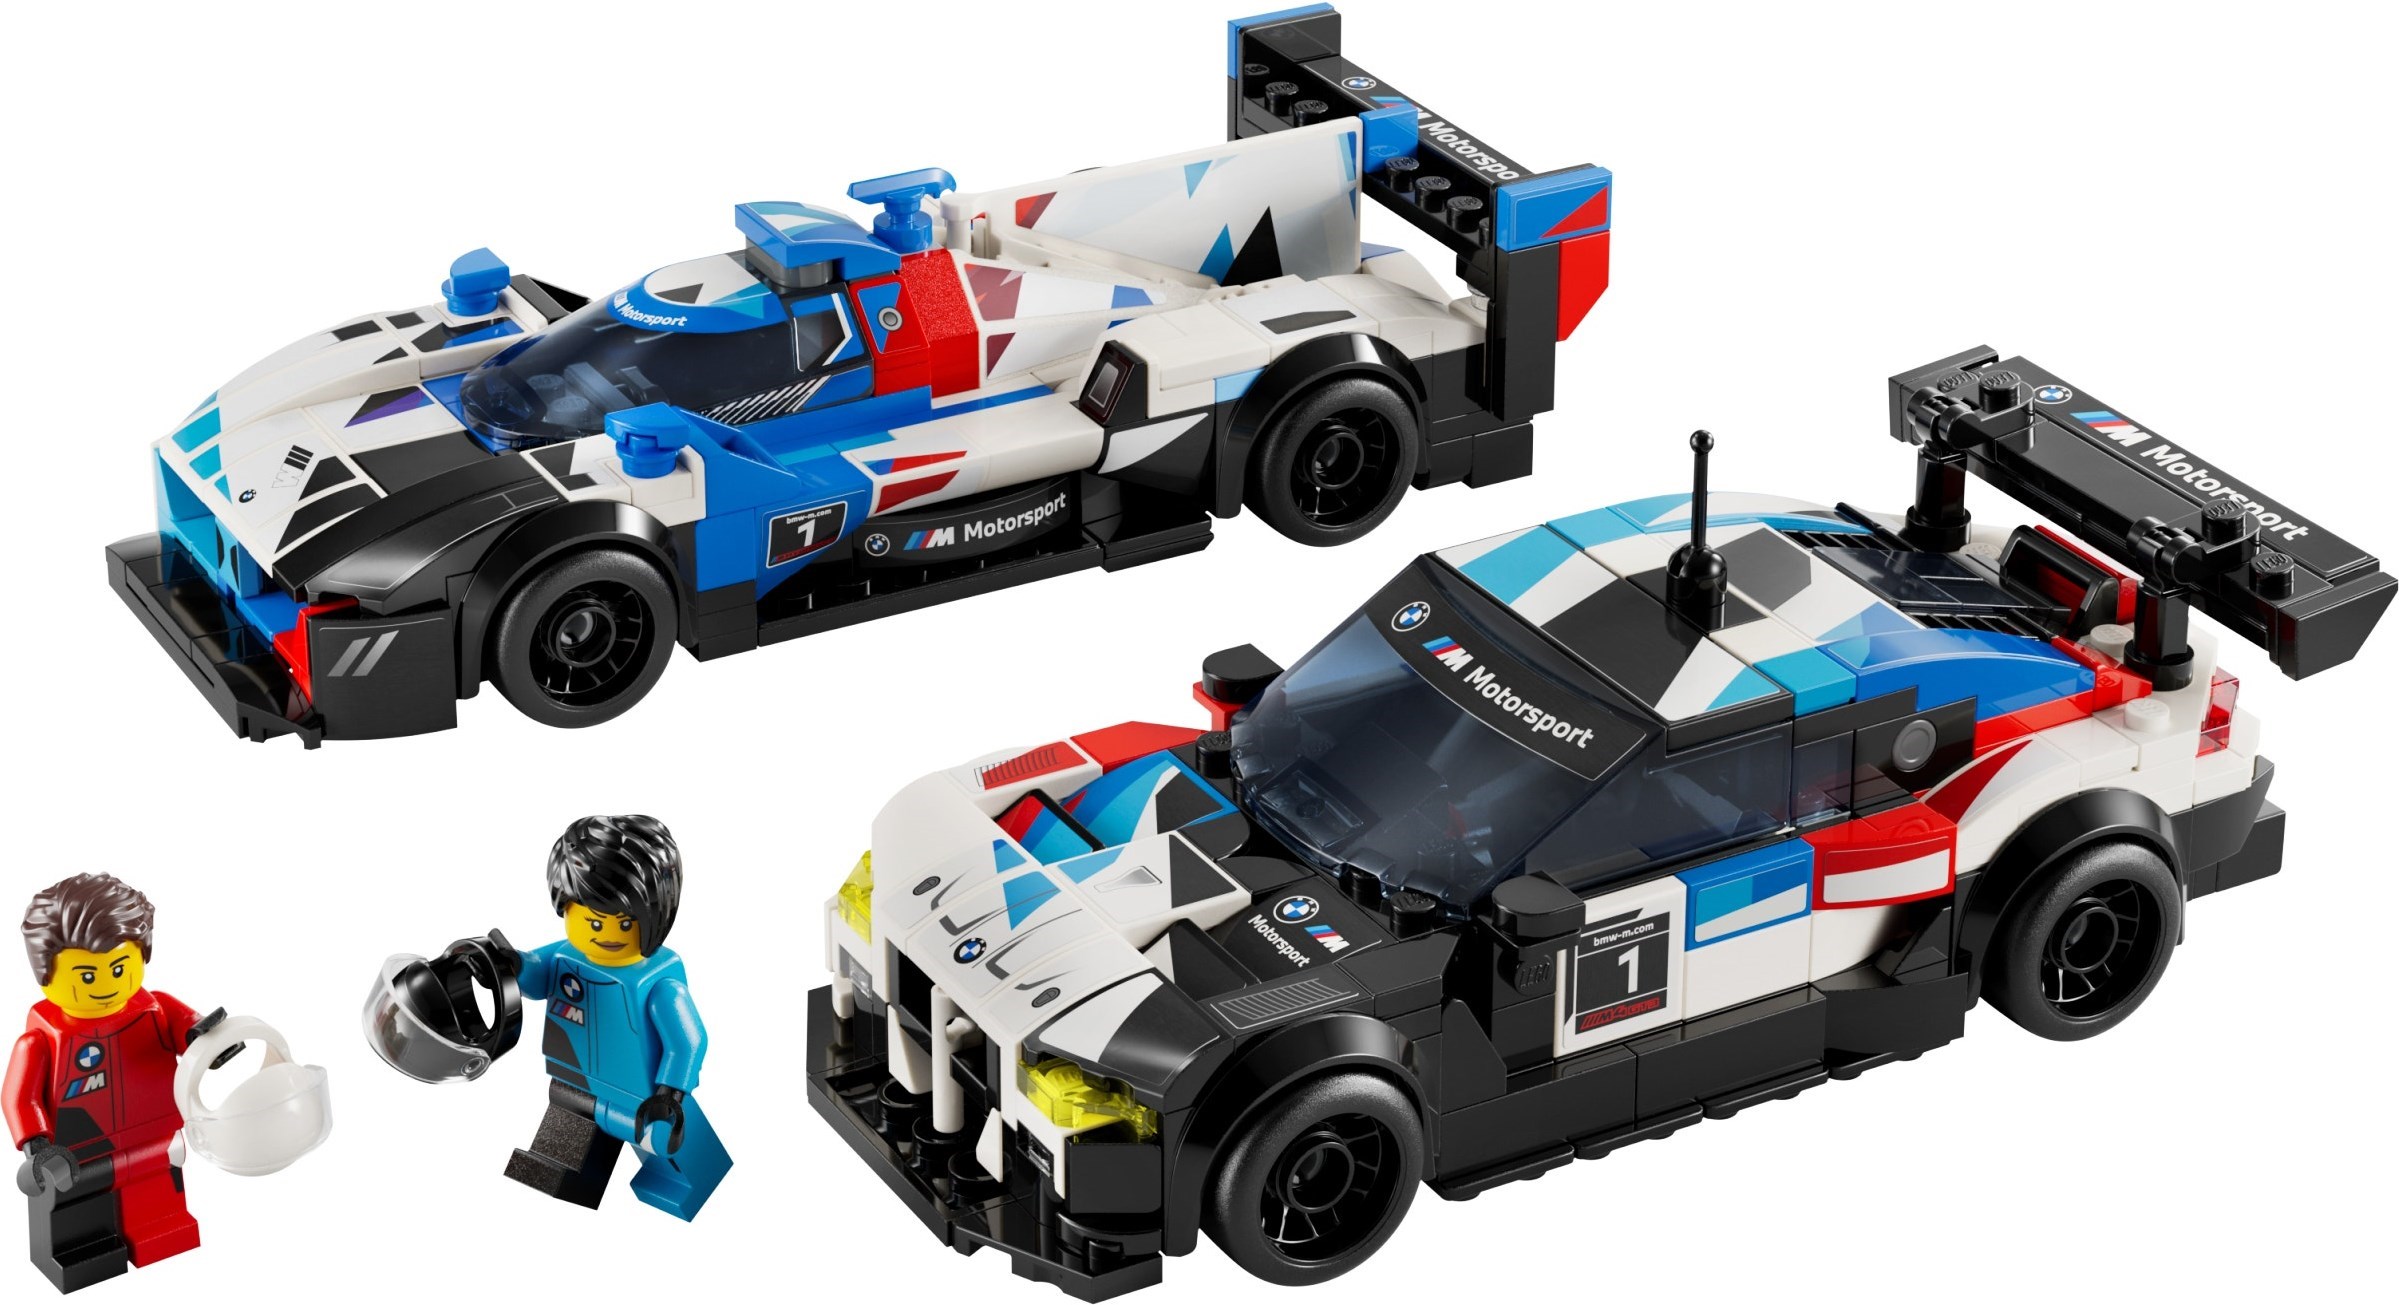 First look at the 2021 LEGO Speed Champions lineup featuring